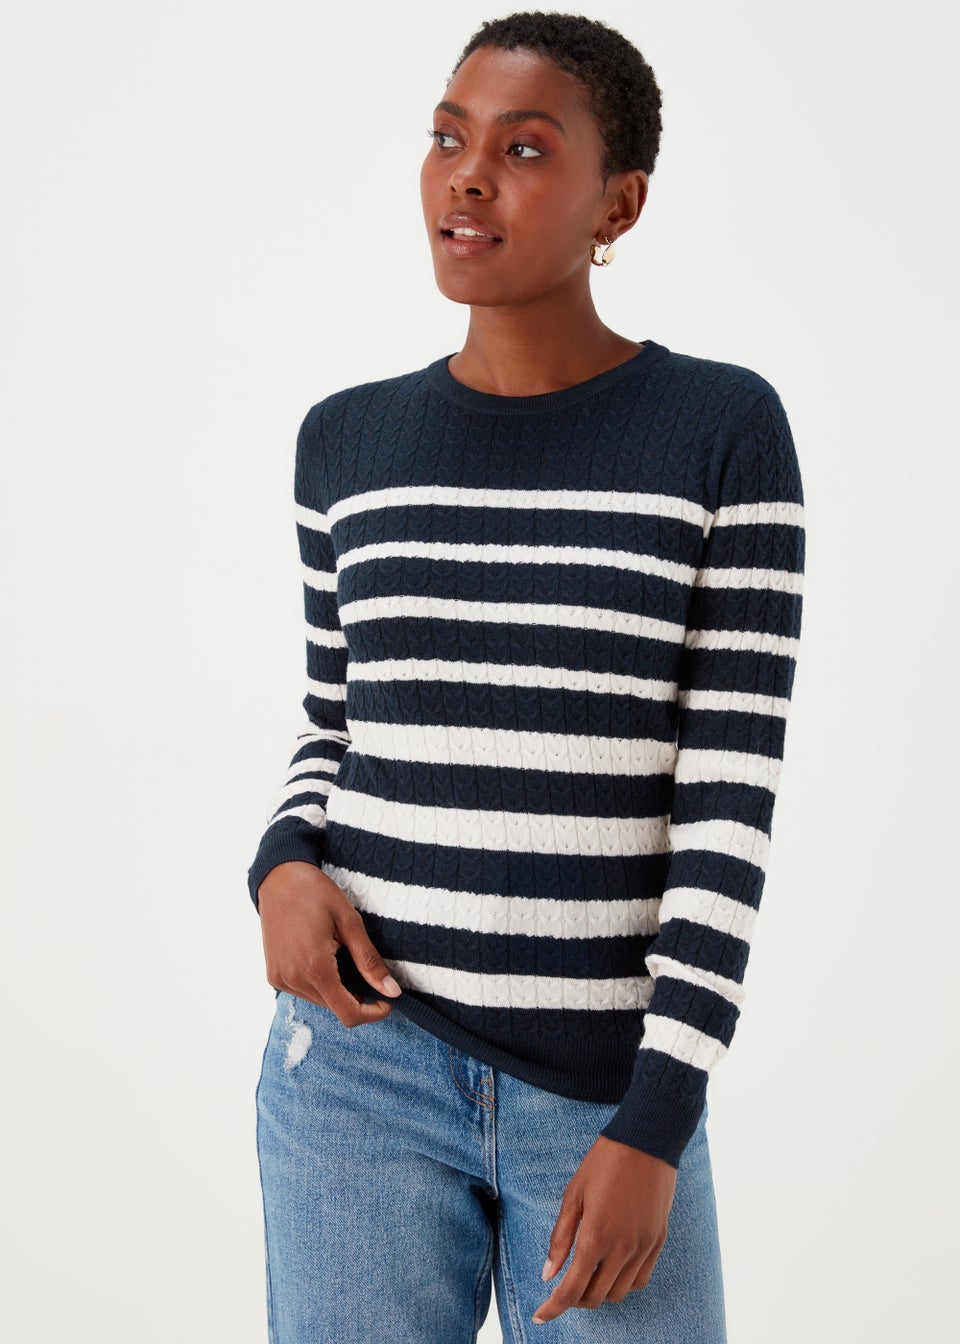 Navy Stripe Baby Cable Knit Jumper